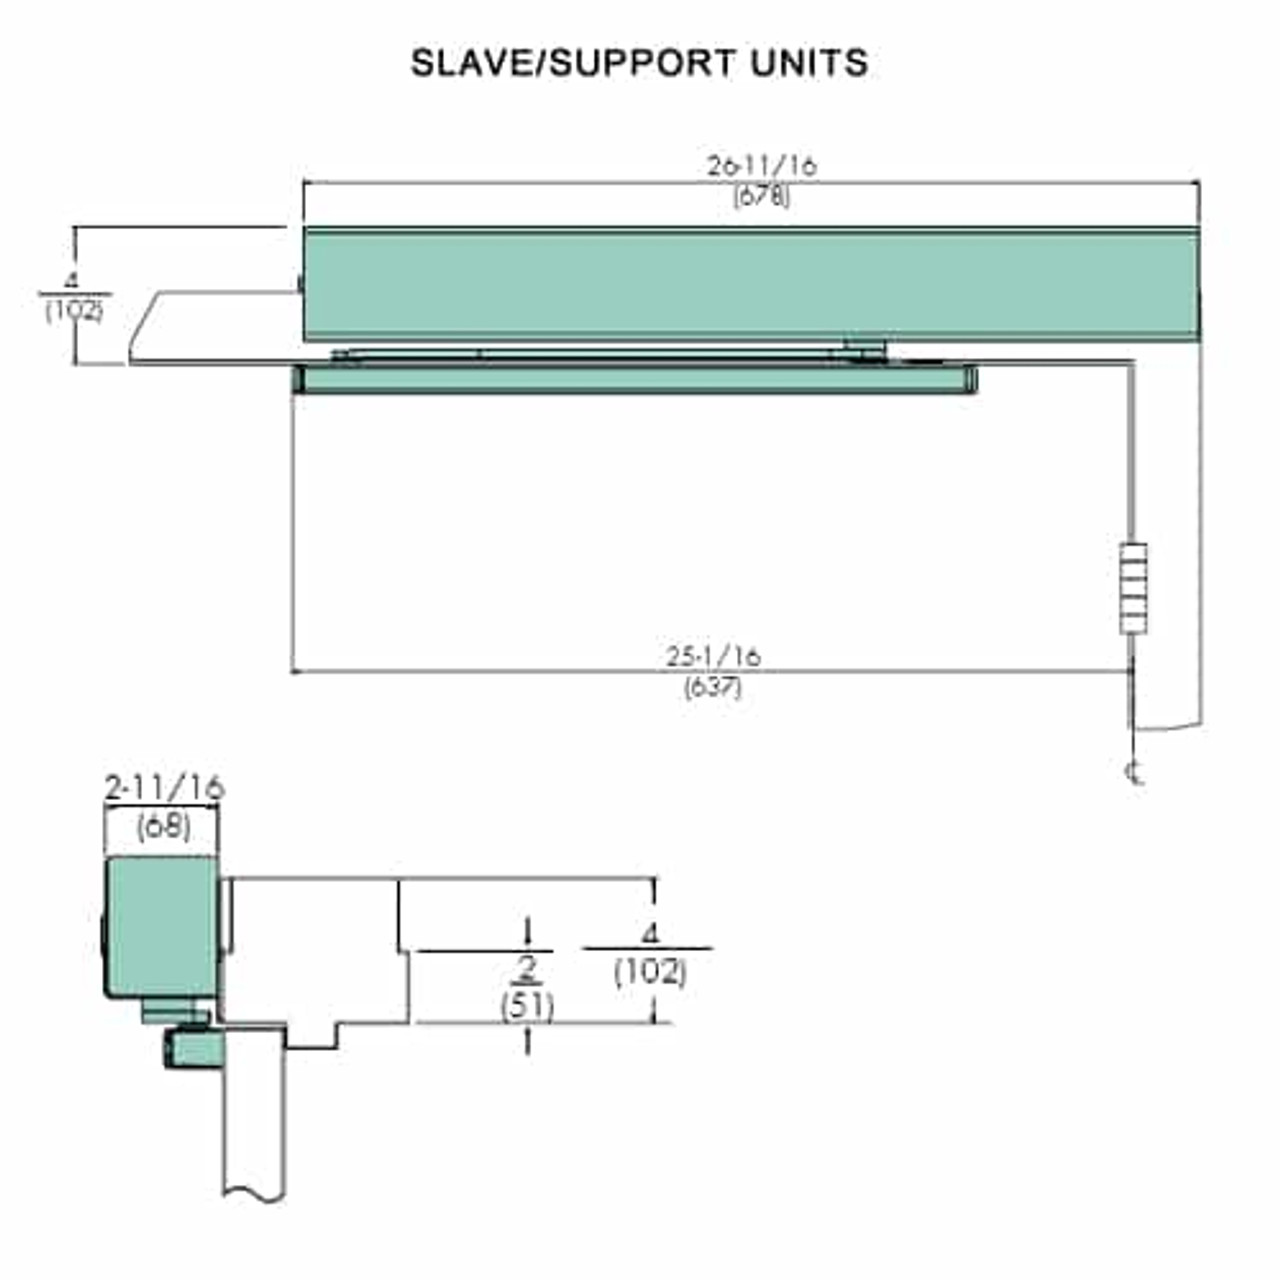 7255MPSO-LH-24VDC-690 Norton 7200 Series Electromechanical Closer and Holder with Double Egress Arm Slide Track Slave/Support Unit in Statuary Bronze Finish